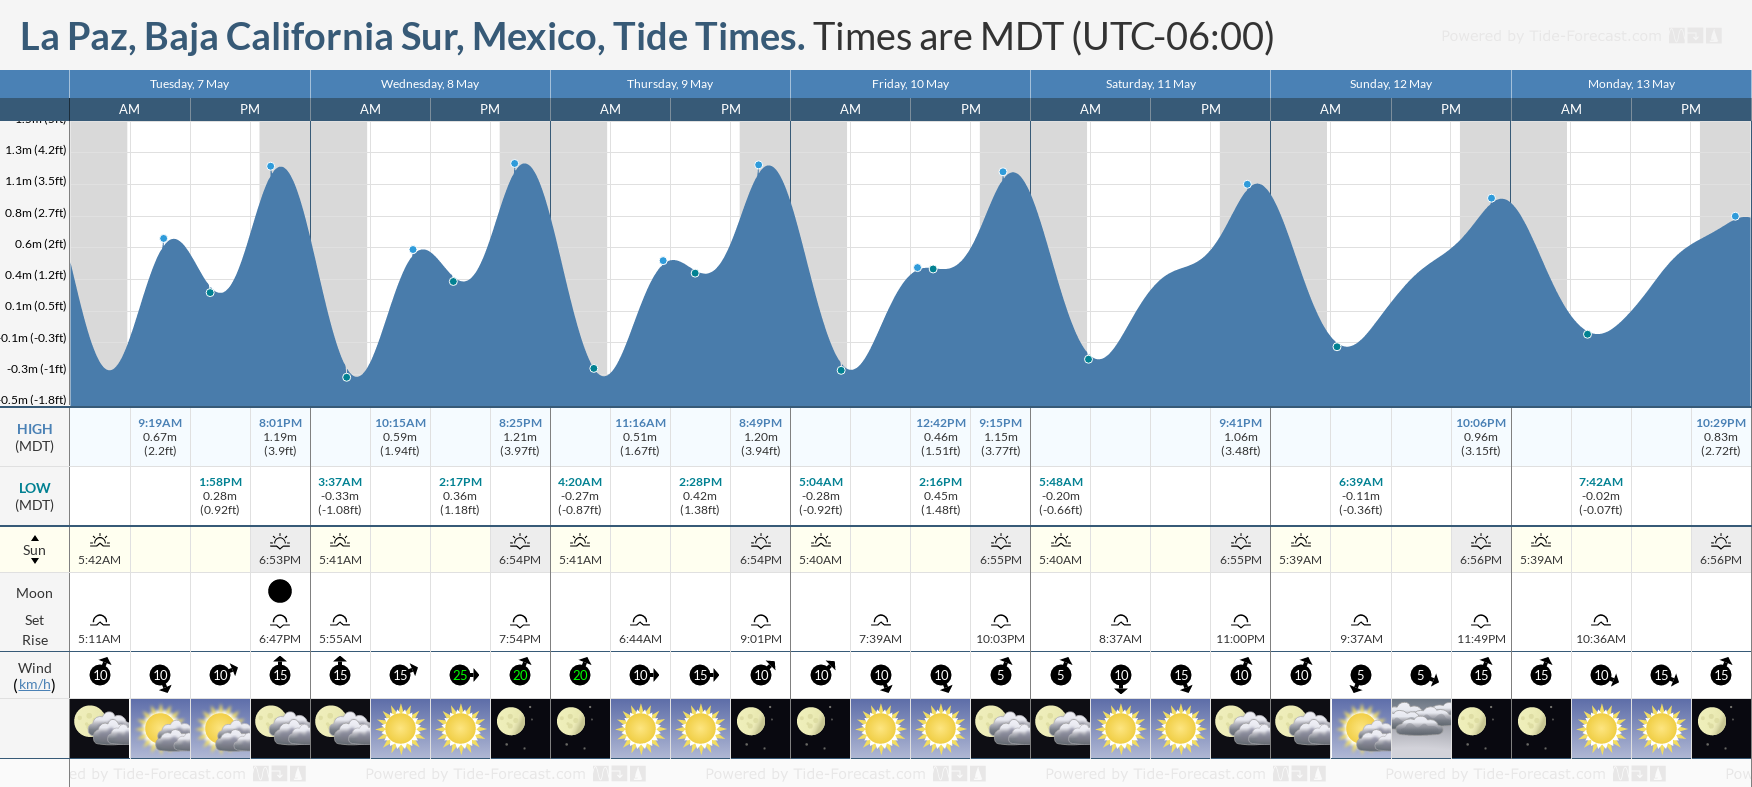 La Paz, Baja California Sur, Mexico Tide Chart including high and low tide tide times for the next 7 days